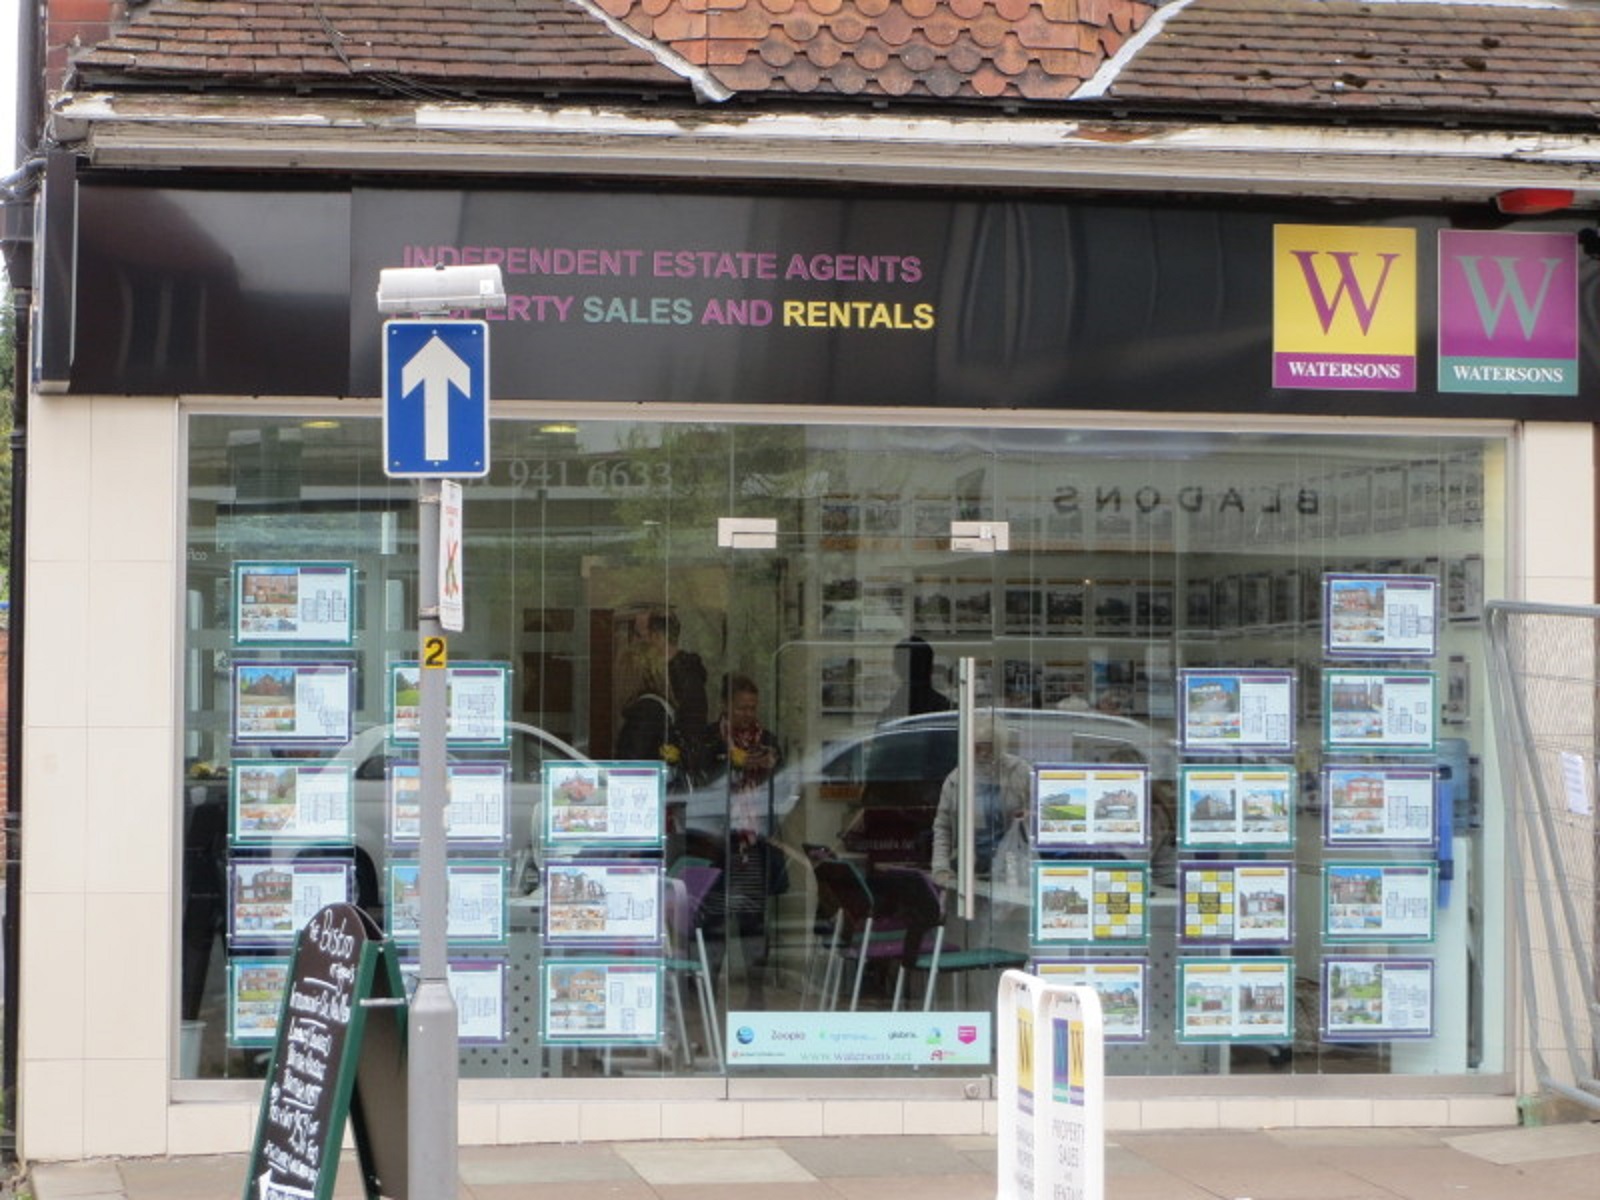 Watersons Estate Agents